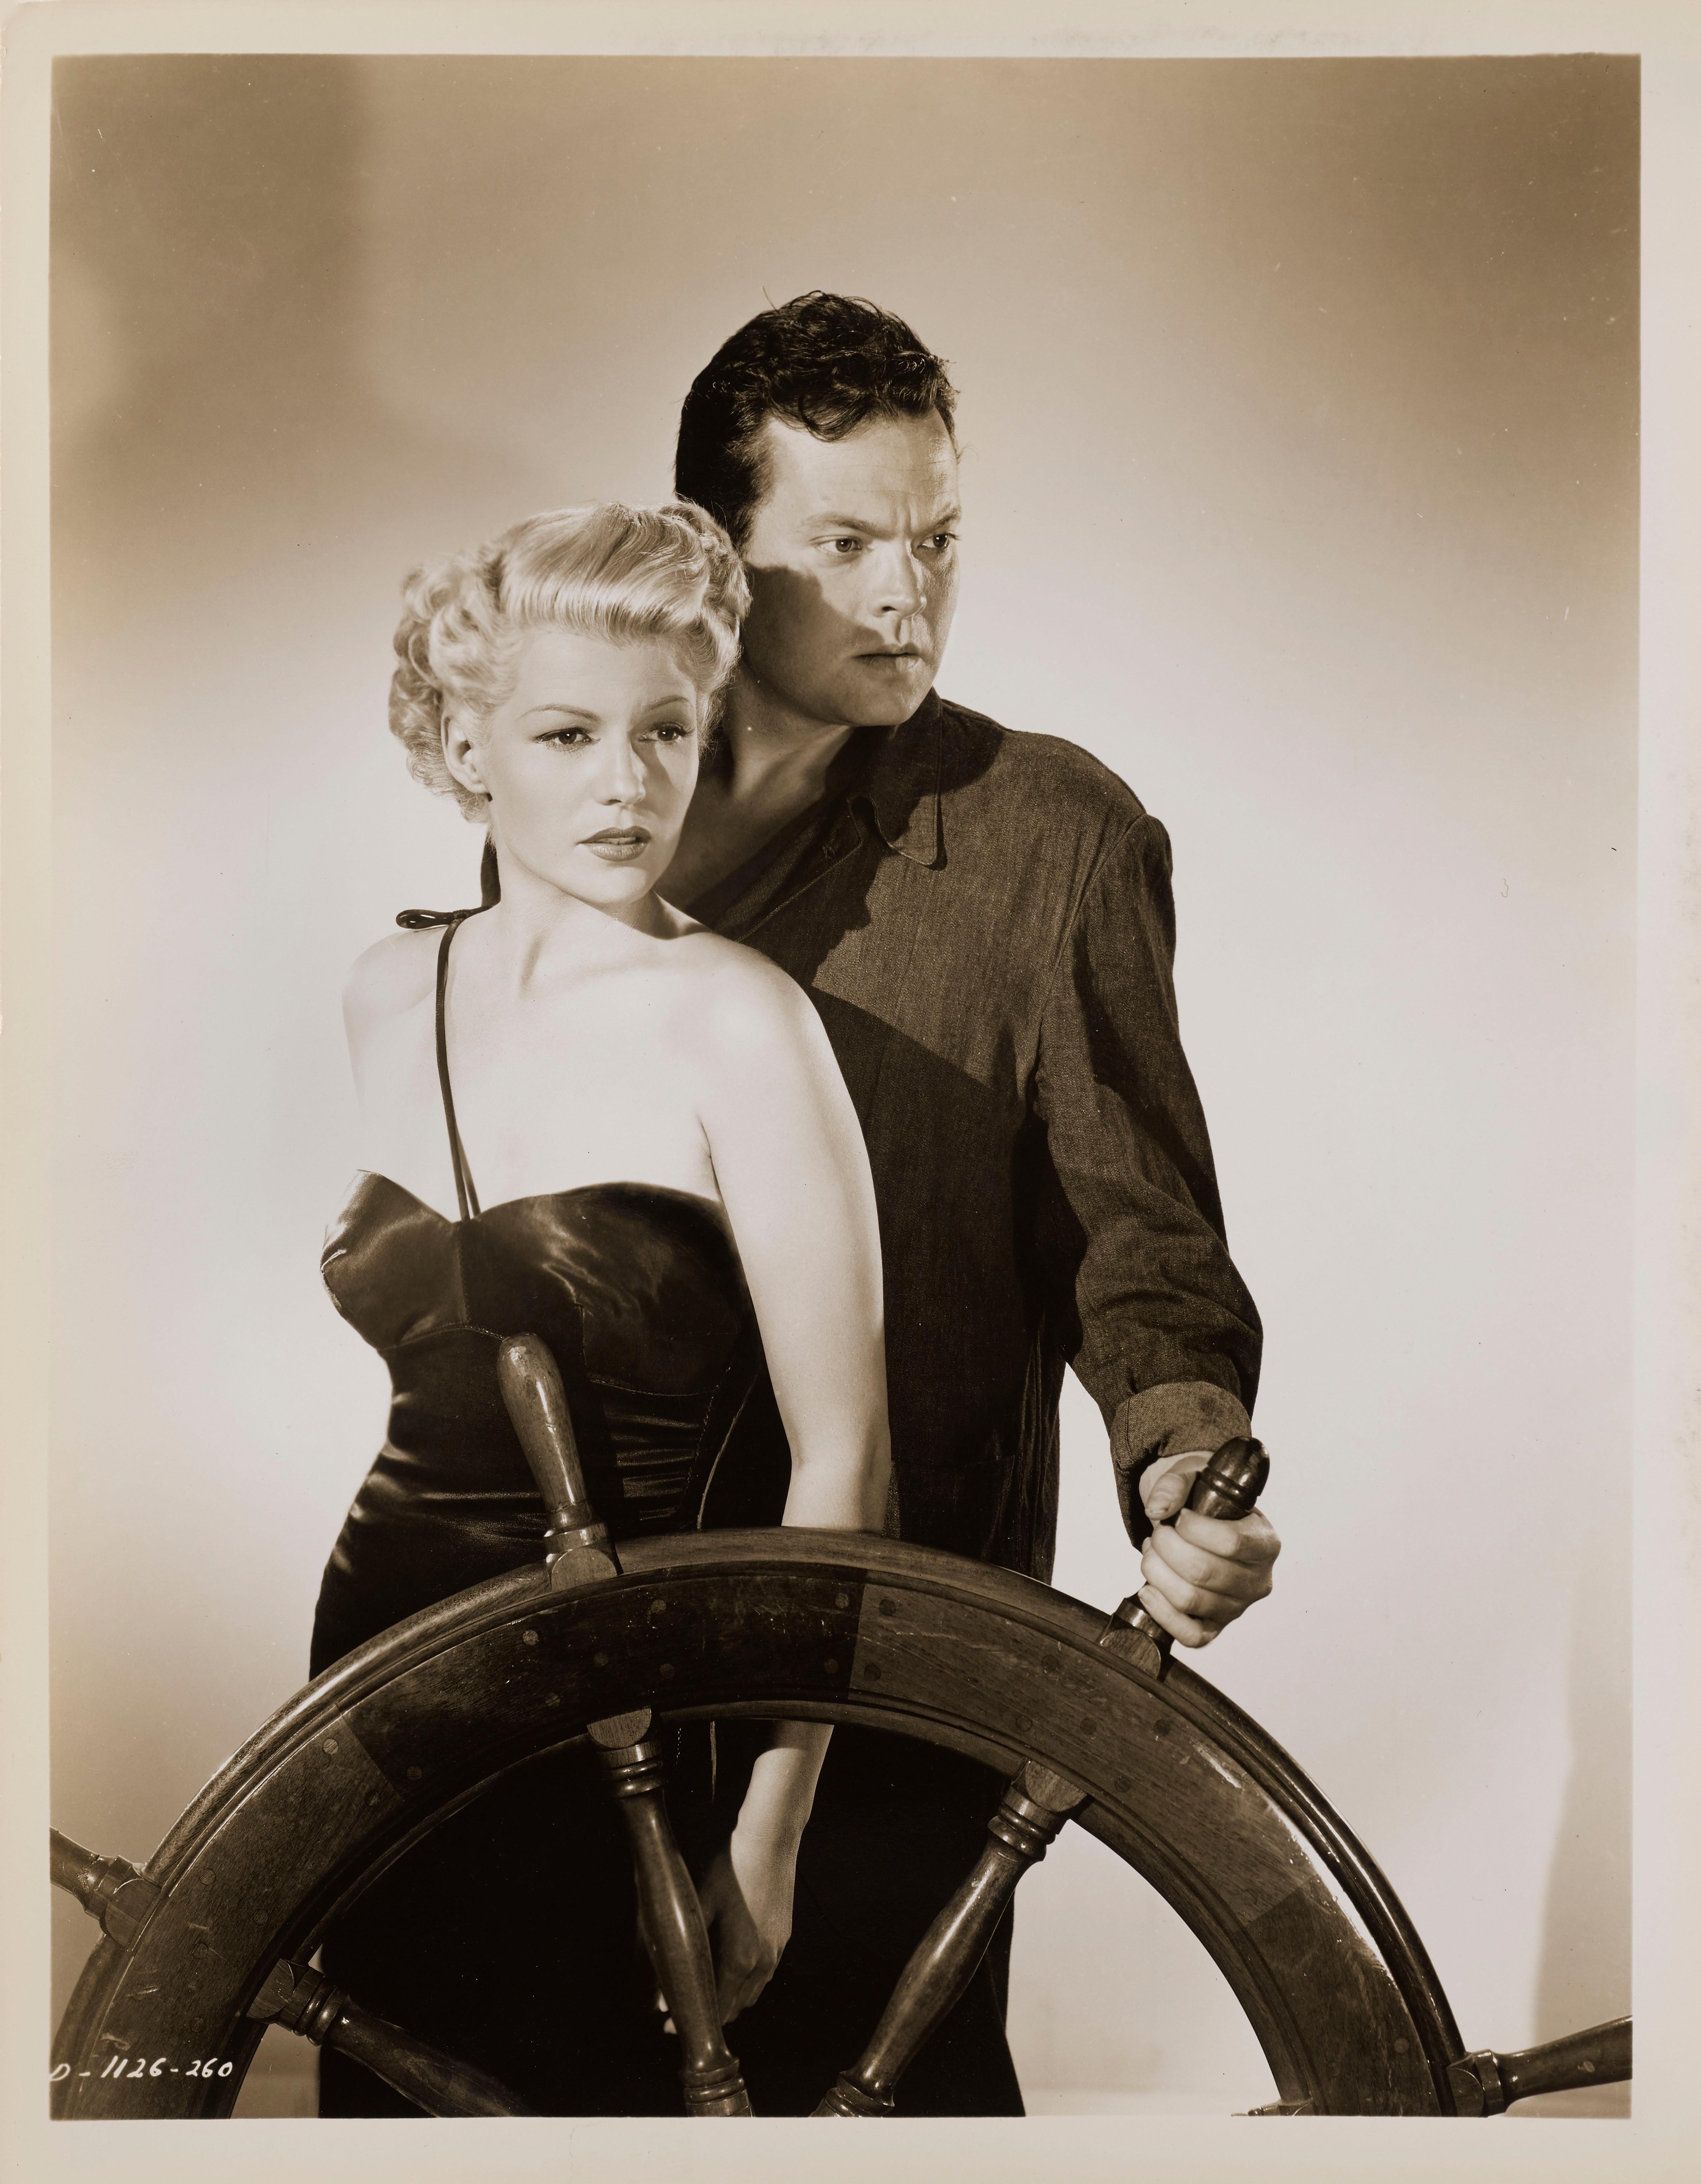 Original photographic production photo from 1948 film Noir The Lady from Shanghai starring Rita Hayworth, Orson Welles and directed by Orson Welles. The photo was taken by Robert Coburn (1900- 1990) This piece would be shipped flat in strong card.